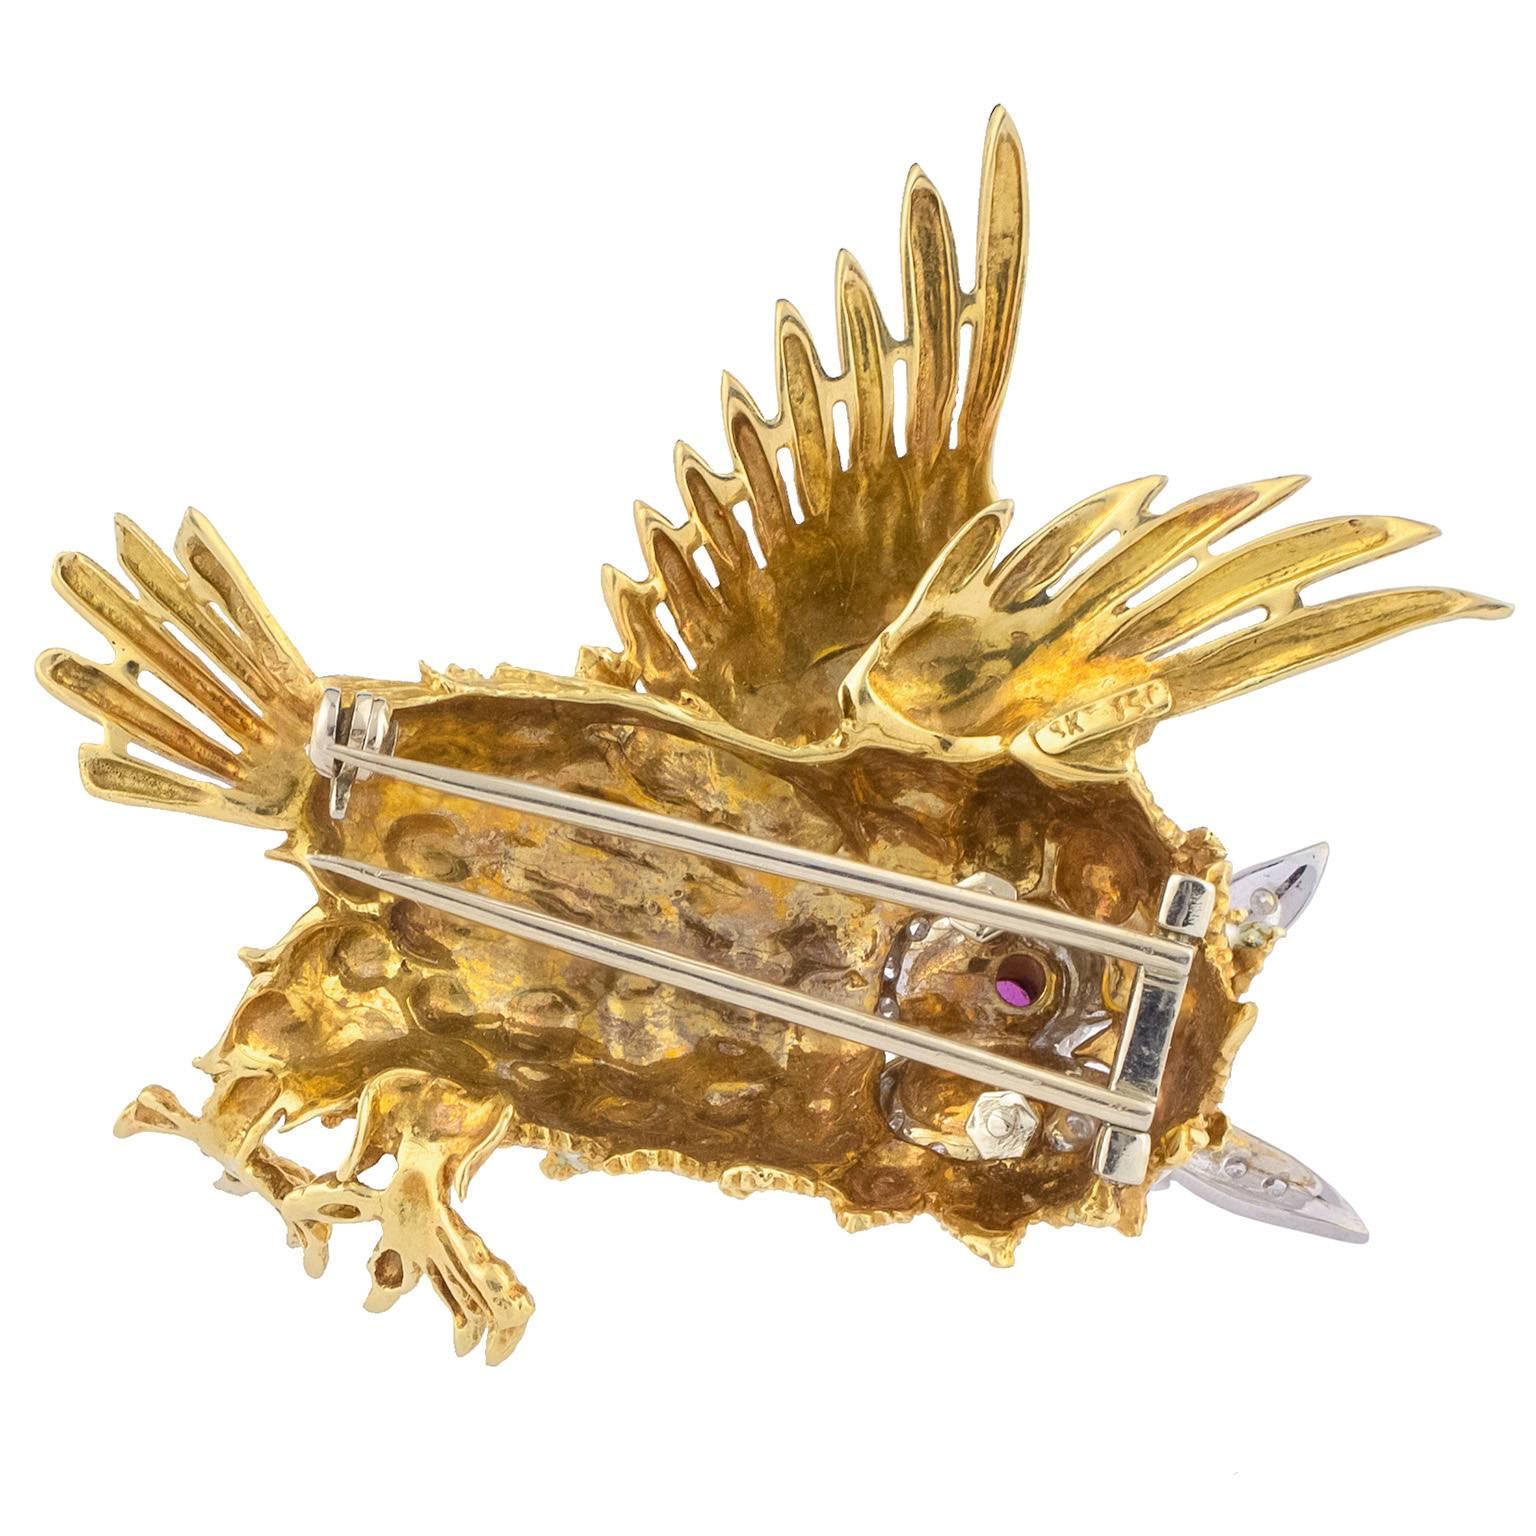 1970's brooch in plain and matte gold, both yellow and white, in the shape of an owl, decorated with 24 single cut diamonds, totalling 0.33 carats, rubies and enamel.
Dimensions: 55 x 50 mm (2.17 x 1.97 in)